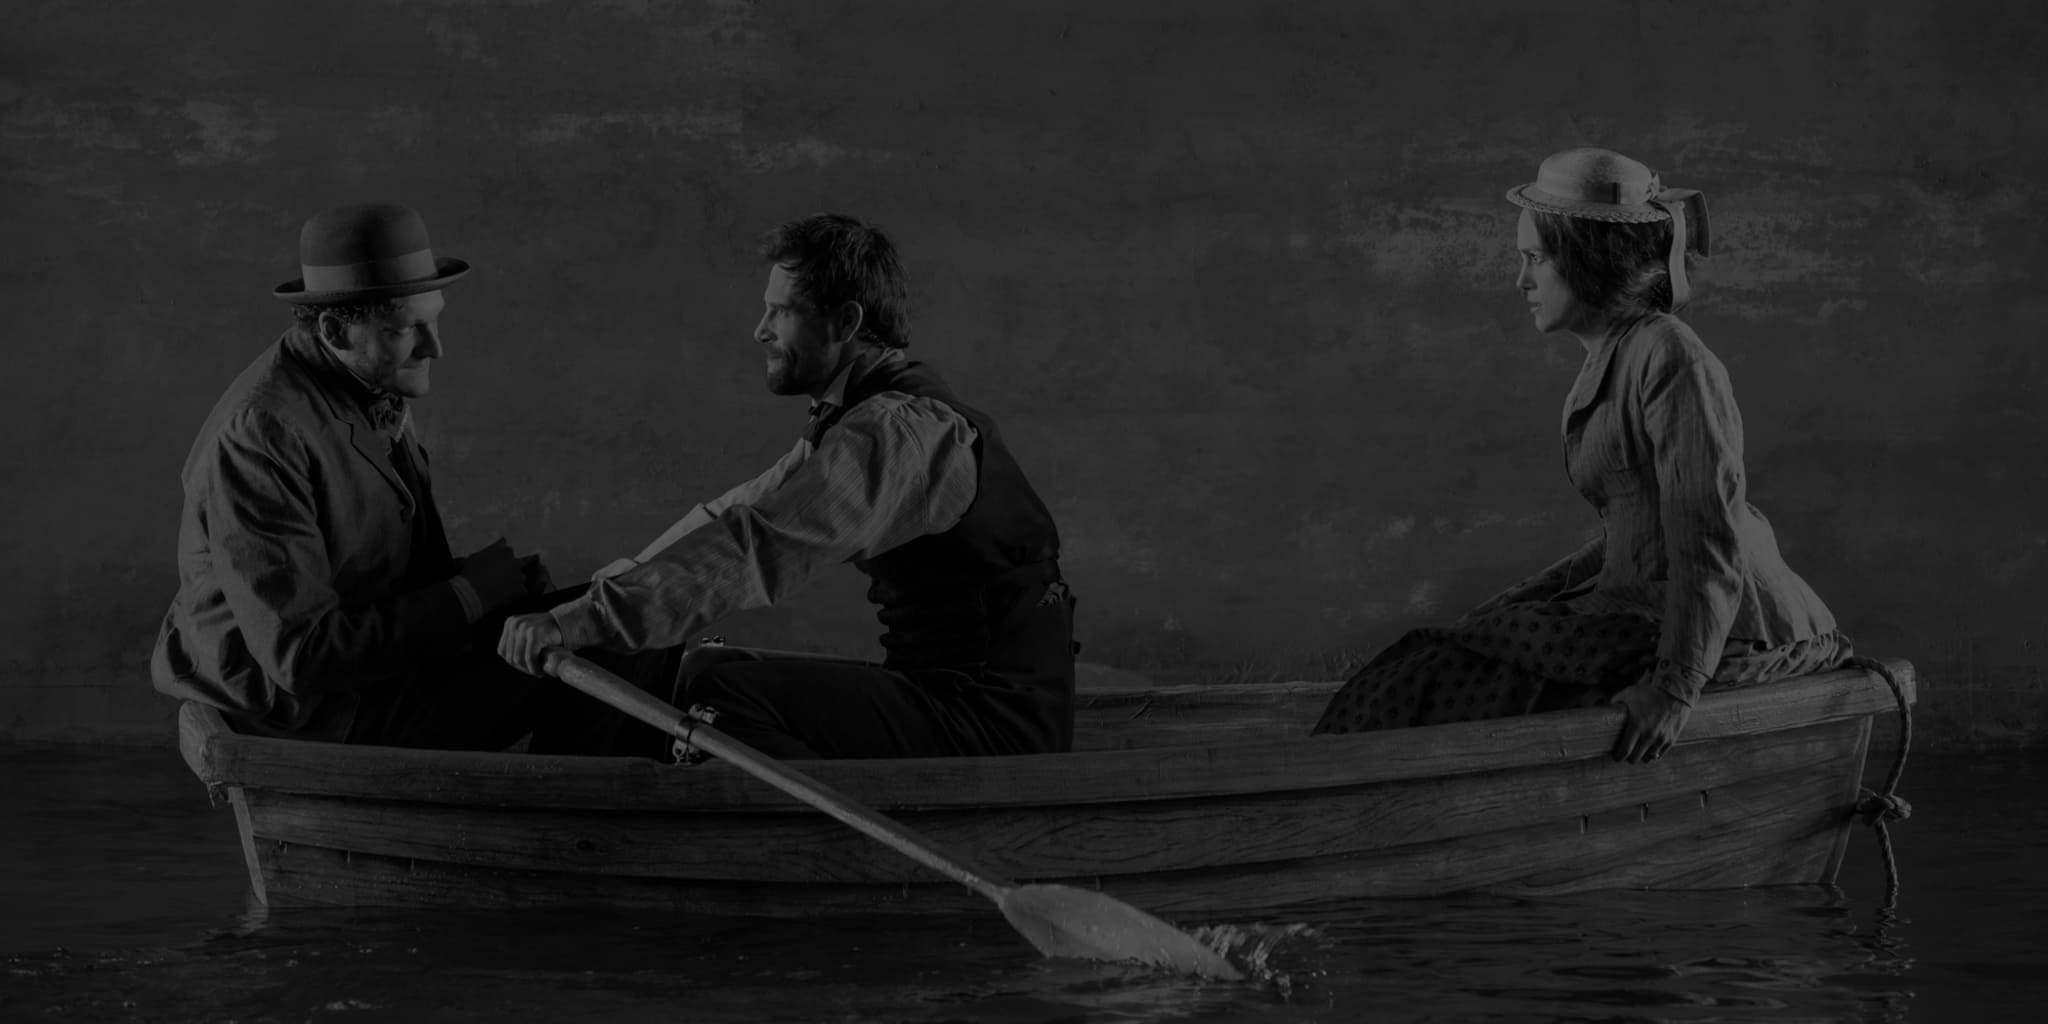 Production photo from THERESE RAQUIN. A man and woman in 1860s clothing sit on either ends of a wooden boat, while a man in the middle paddles them over a body of water.